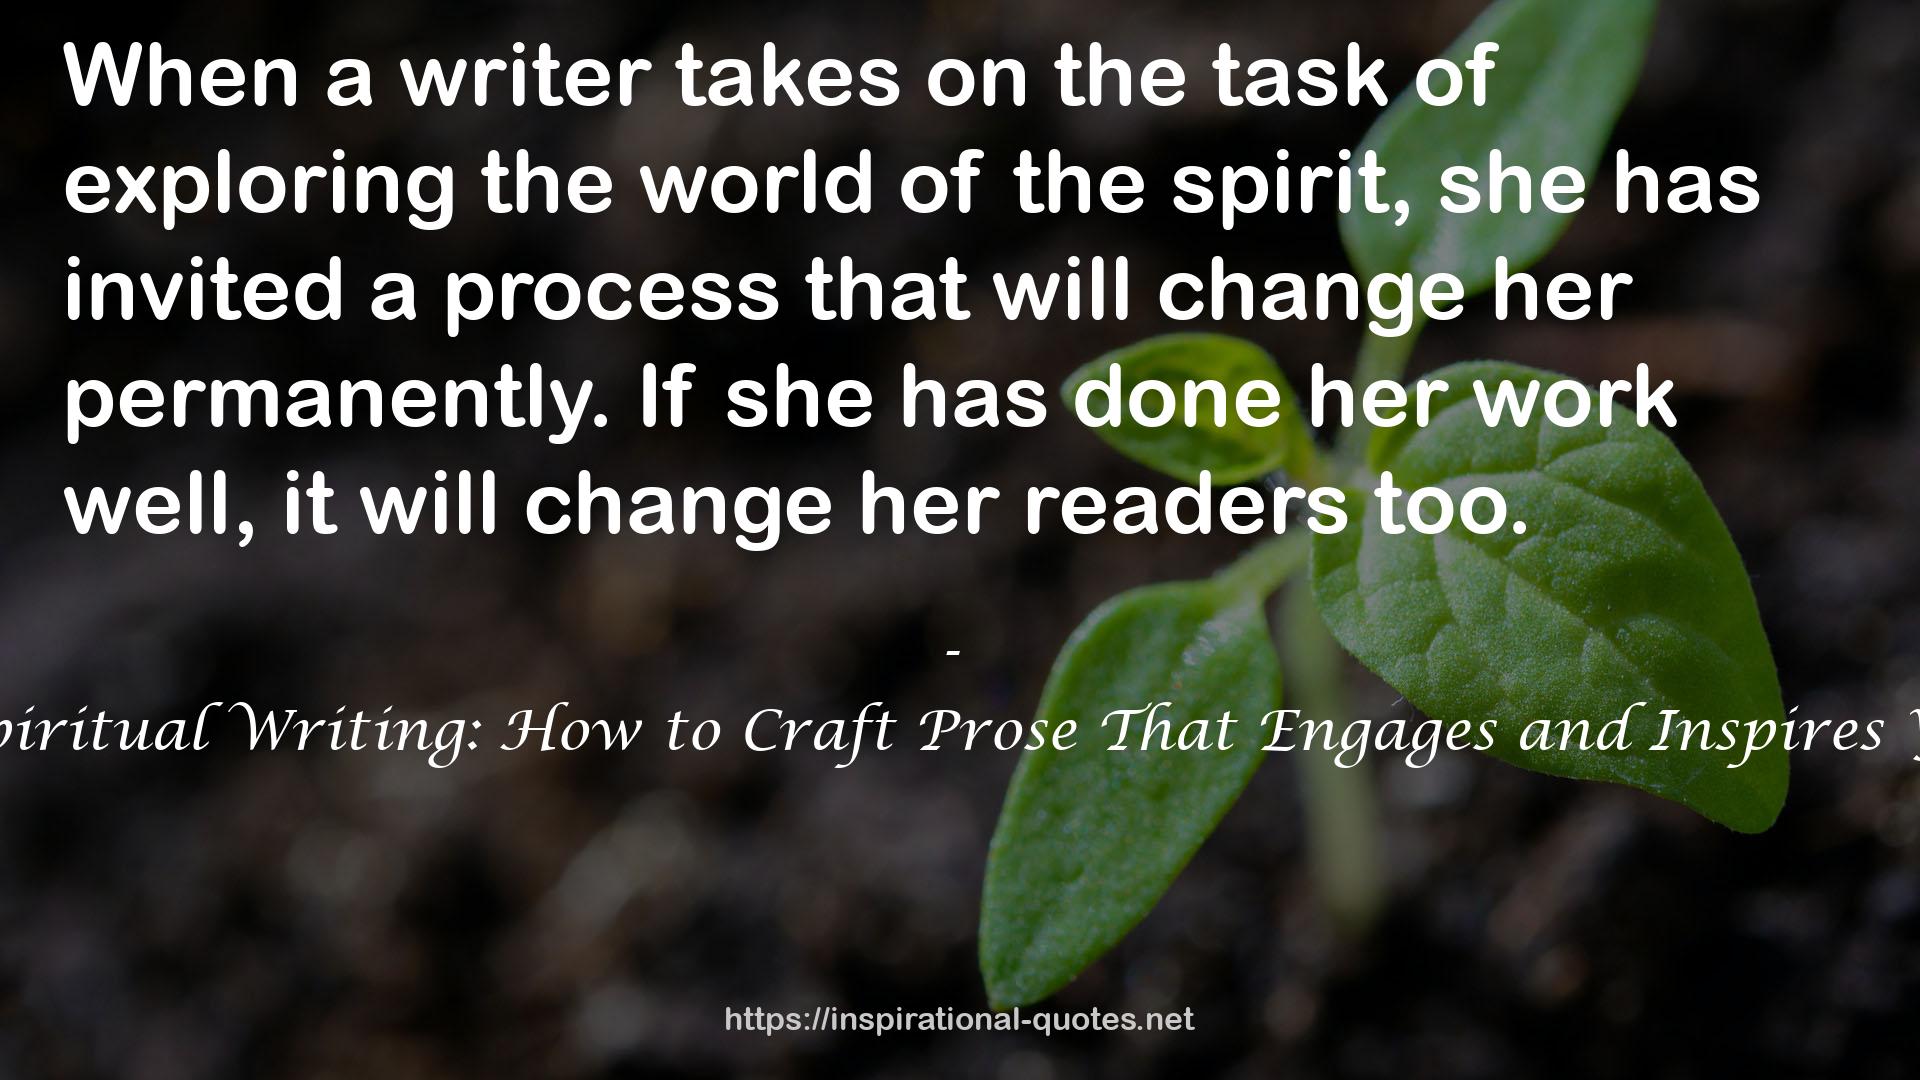 The Art of Spiritual Writing: How to Craft Prose That Engages and Inspires Your Readers QUOTES